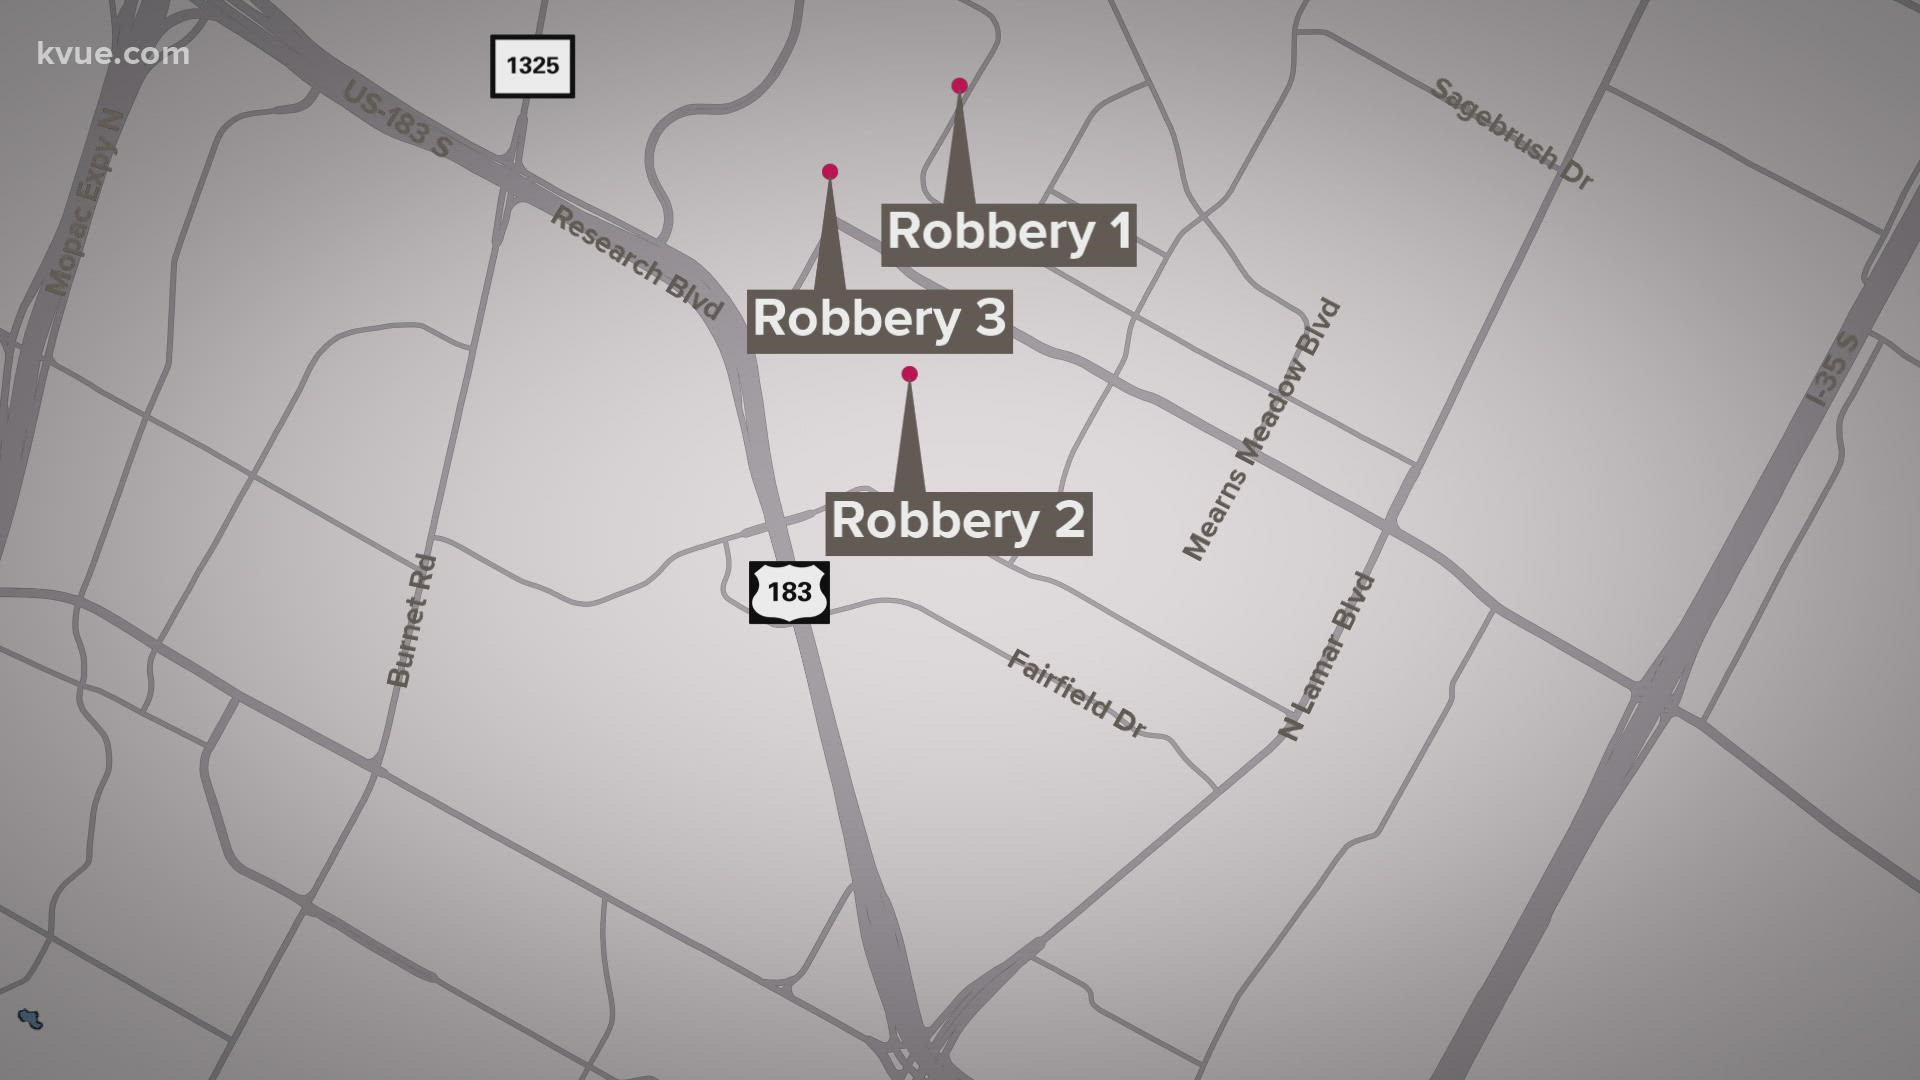 Officials said the robberies happened in northeast Austin over the last month and that they are waiting for more possible victims to come forward.